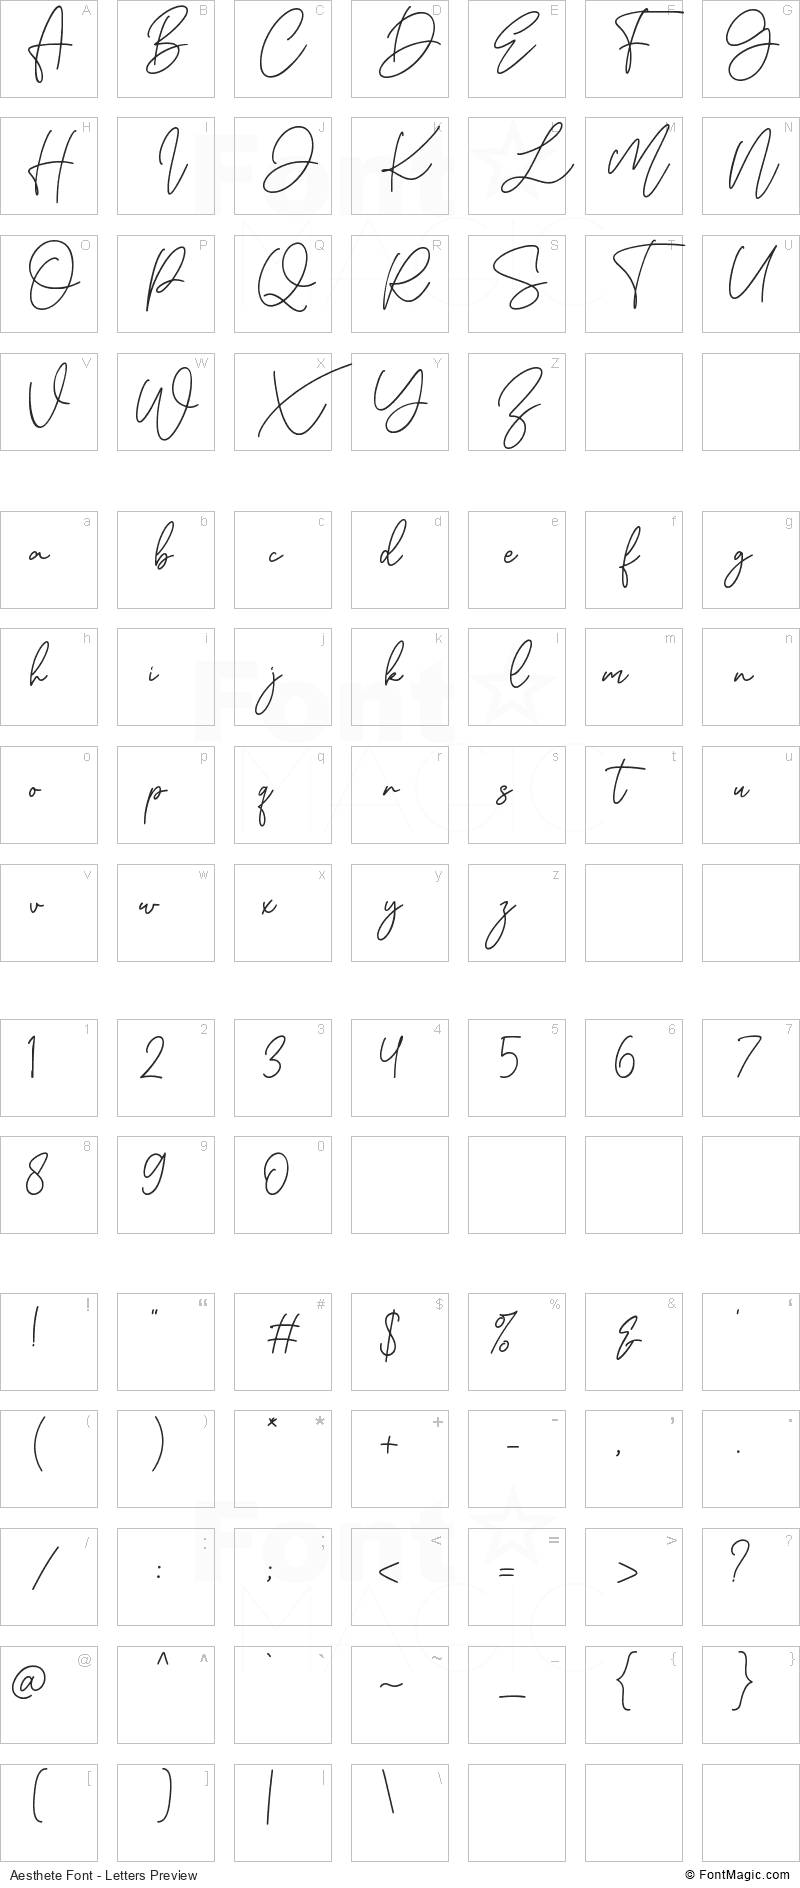 Aesthete Font - All Latters Preview Chart